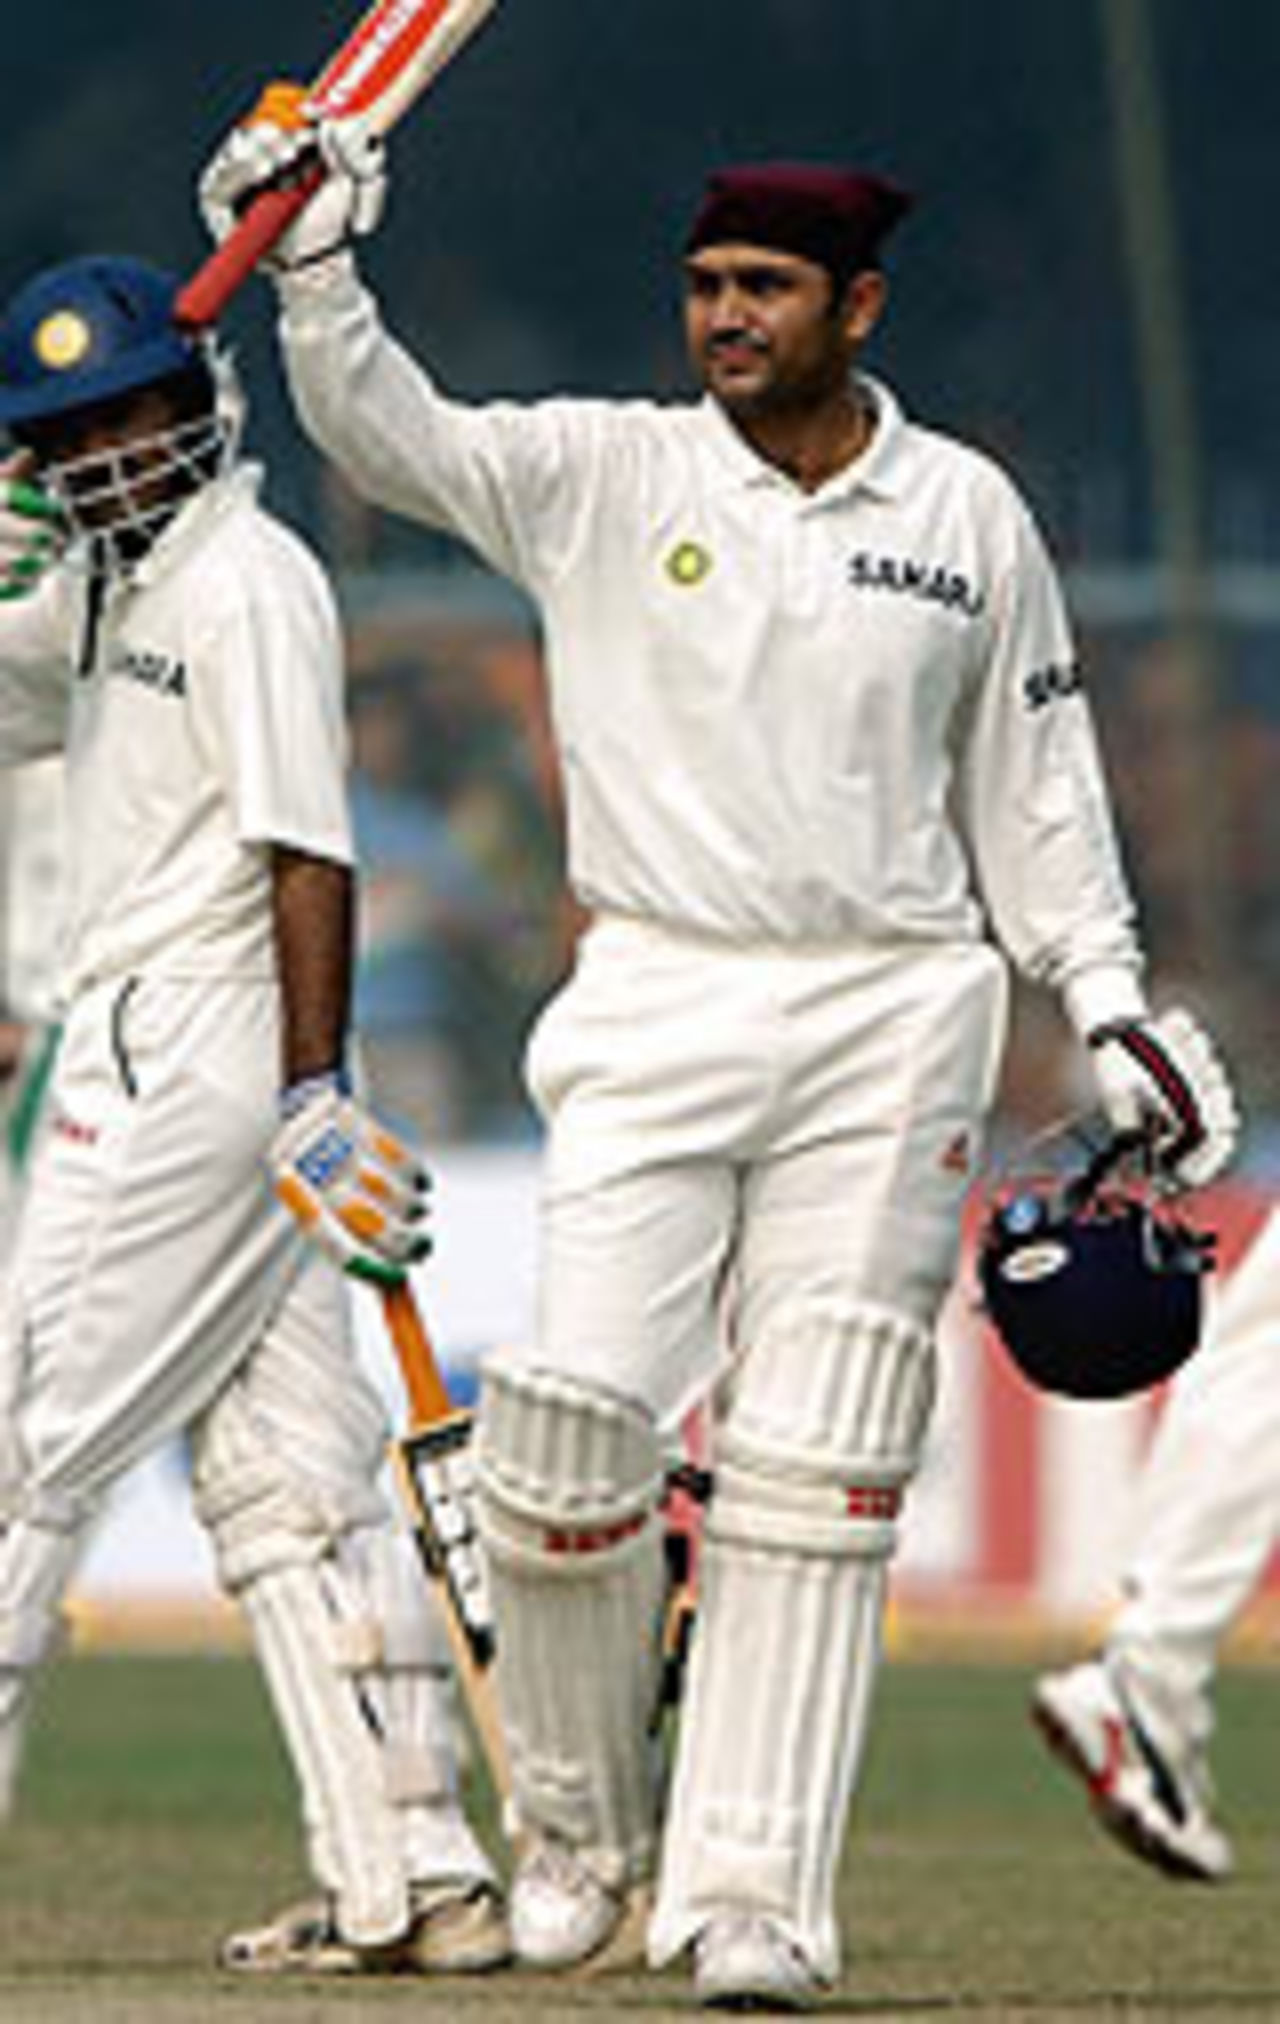 Virender Sehwag raises his bat after his century, India v South Africa, 1st Test, Kanpur, 4th day, November 23, 2004